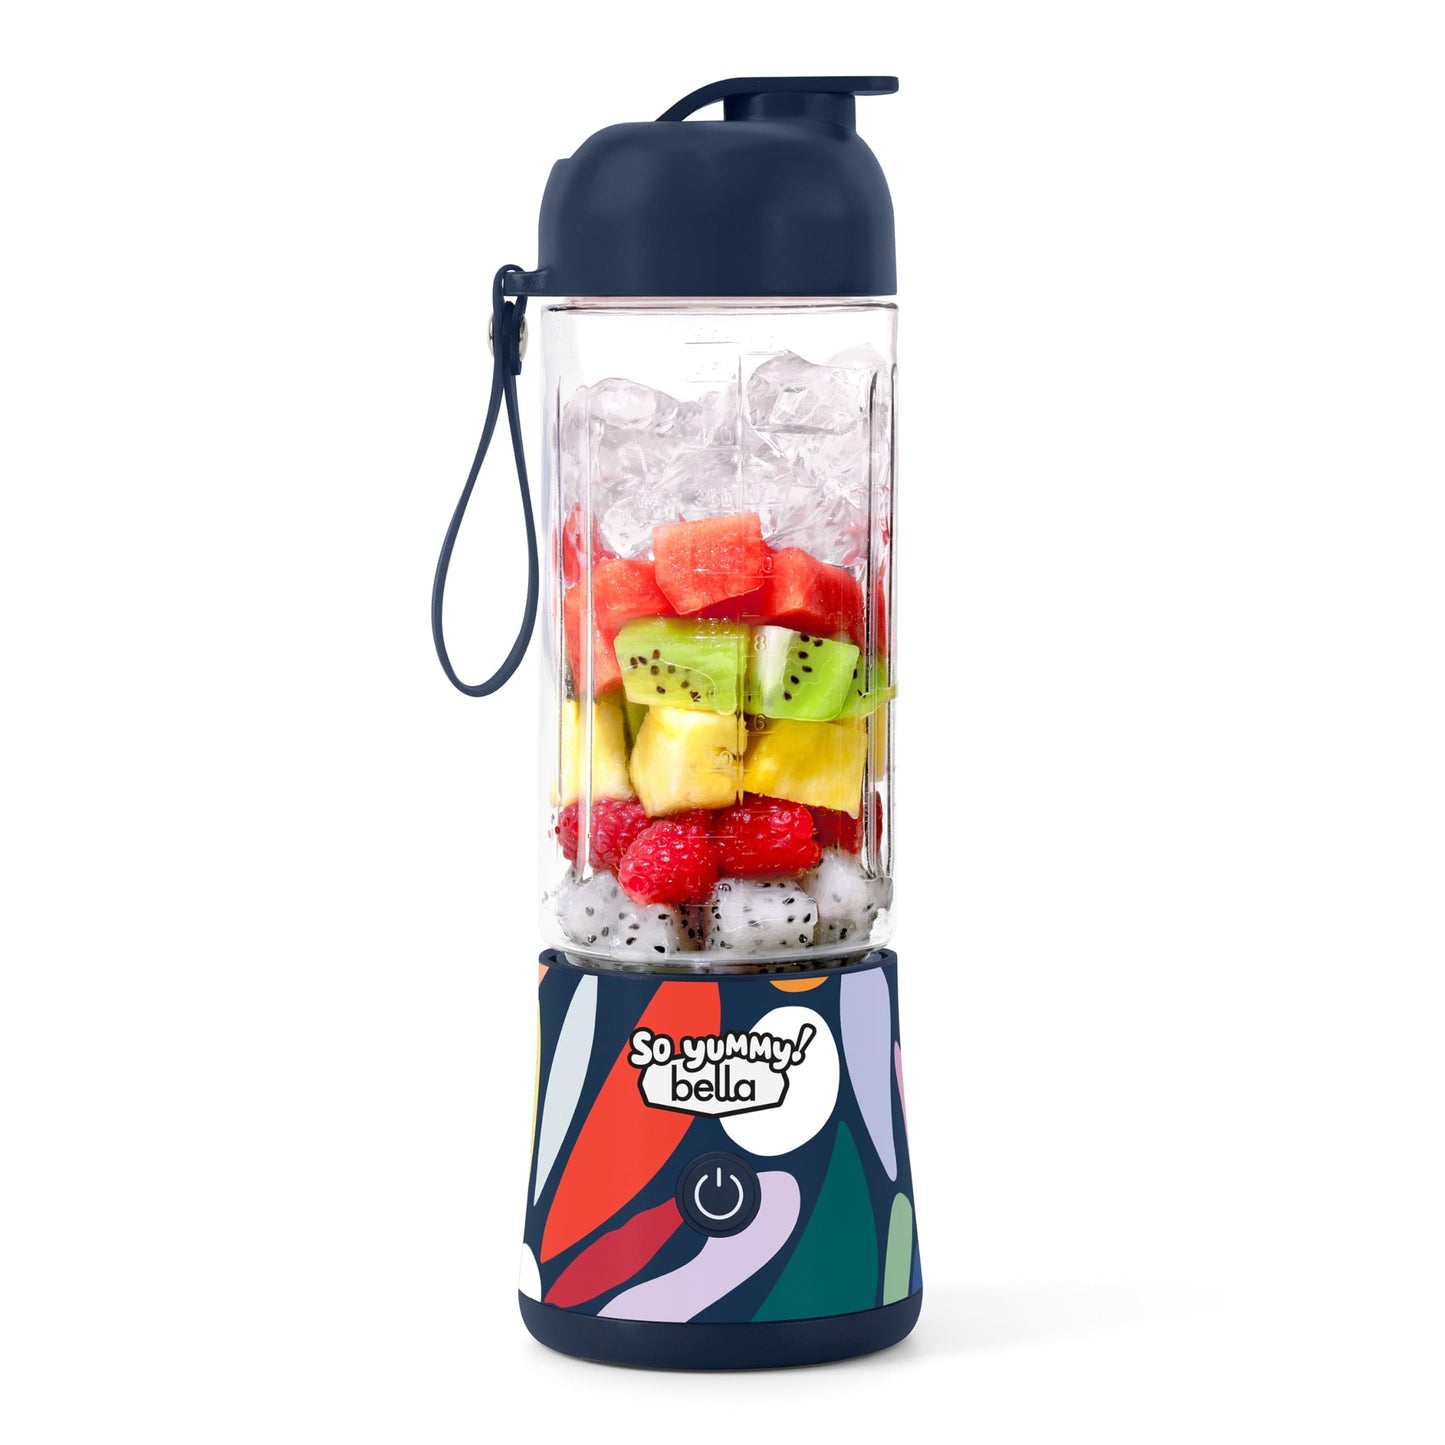 So Yummy by bella Portable To Go Blender, Navy